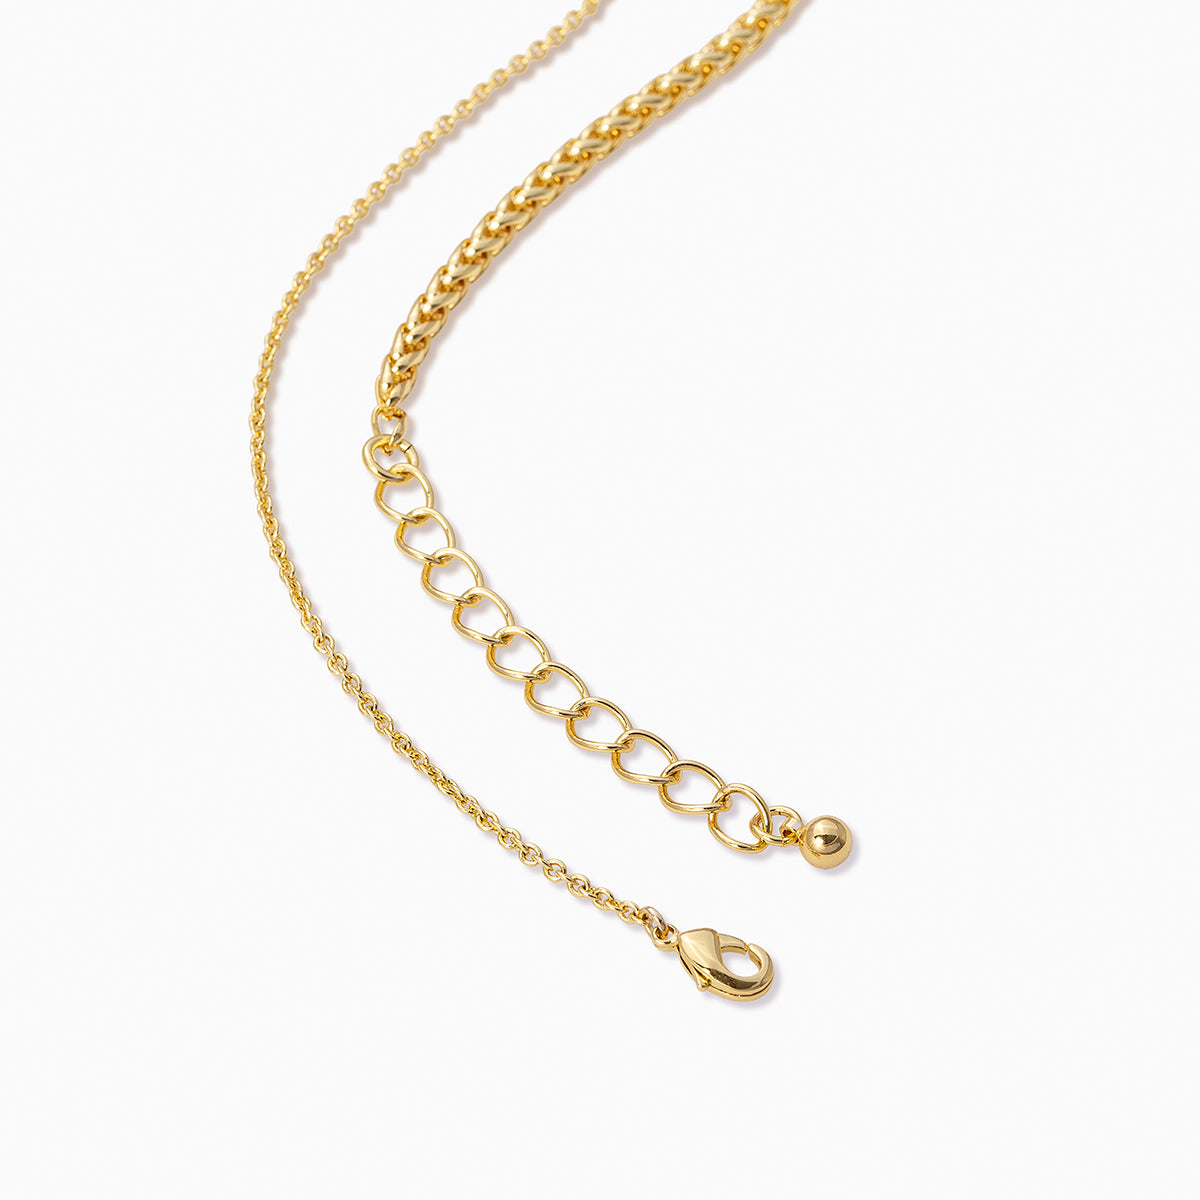 Turn It Up Chain Necklace | Gold | Product Detail Image 2 | Uncommon James